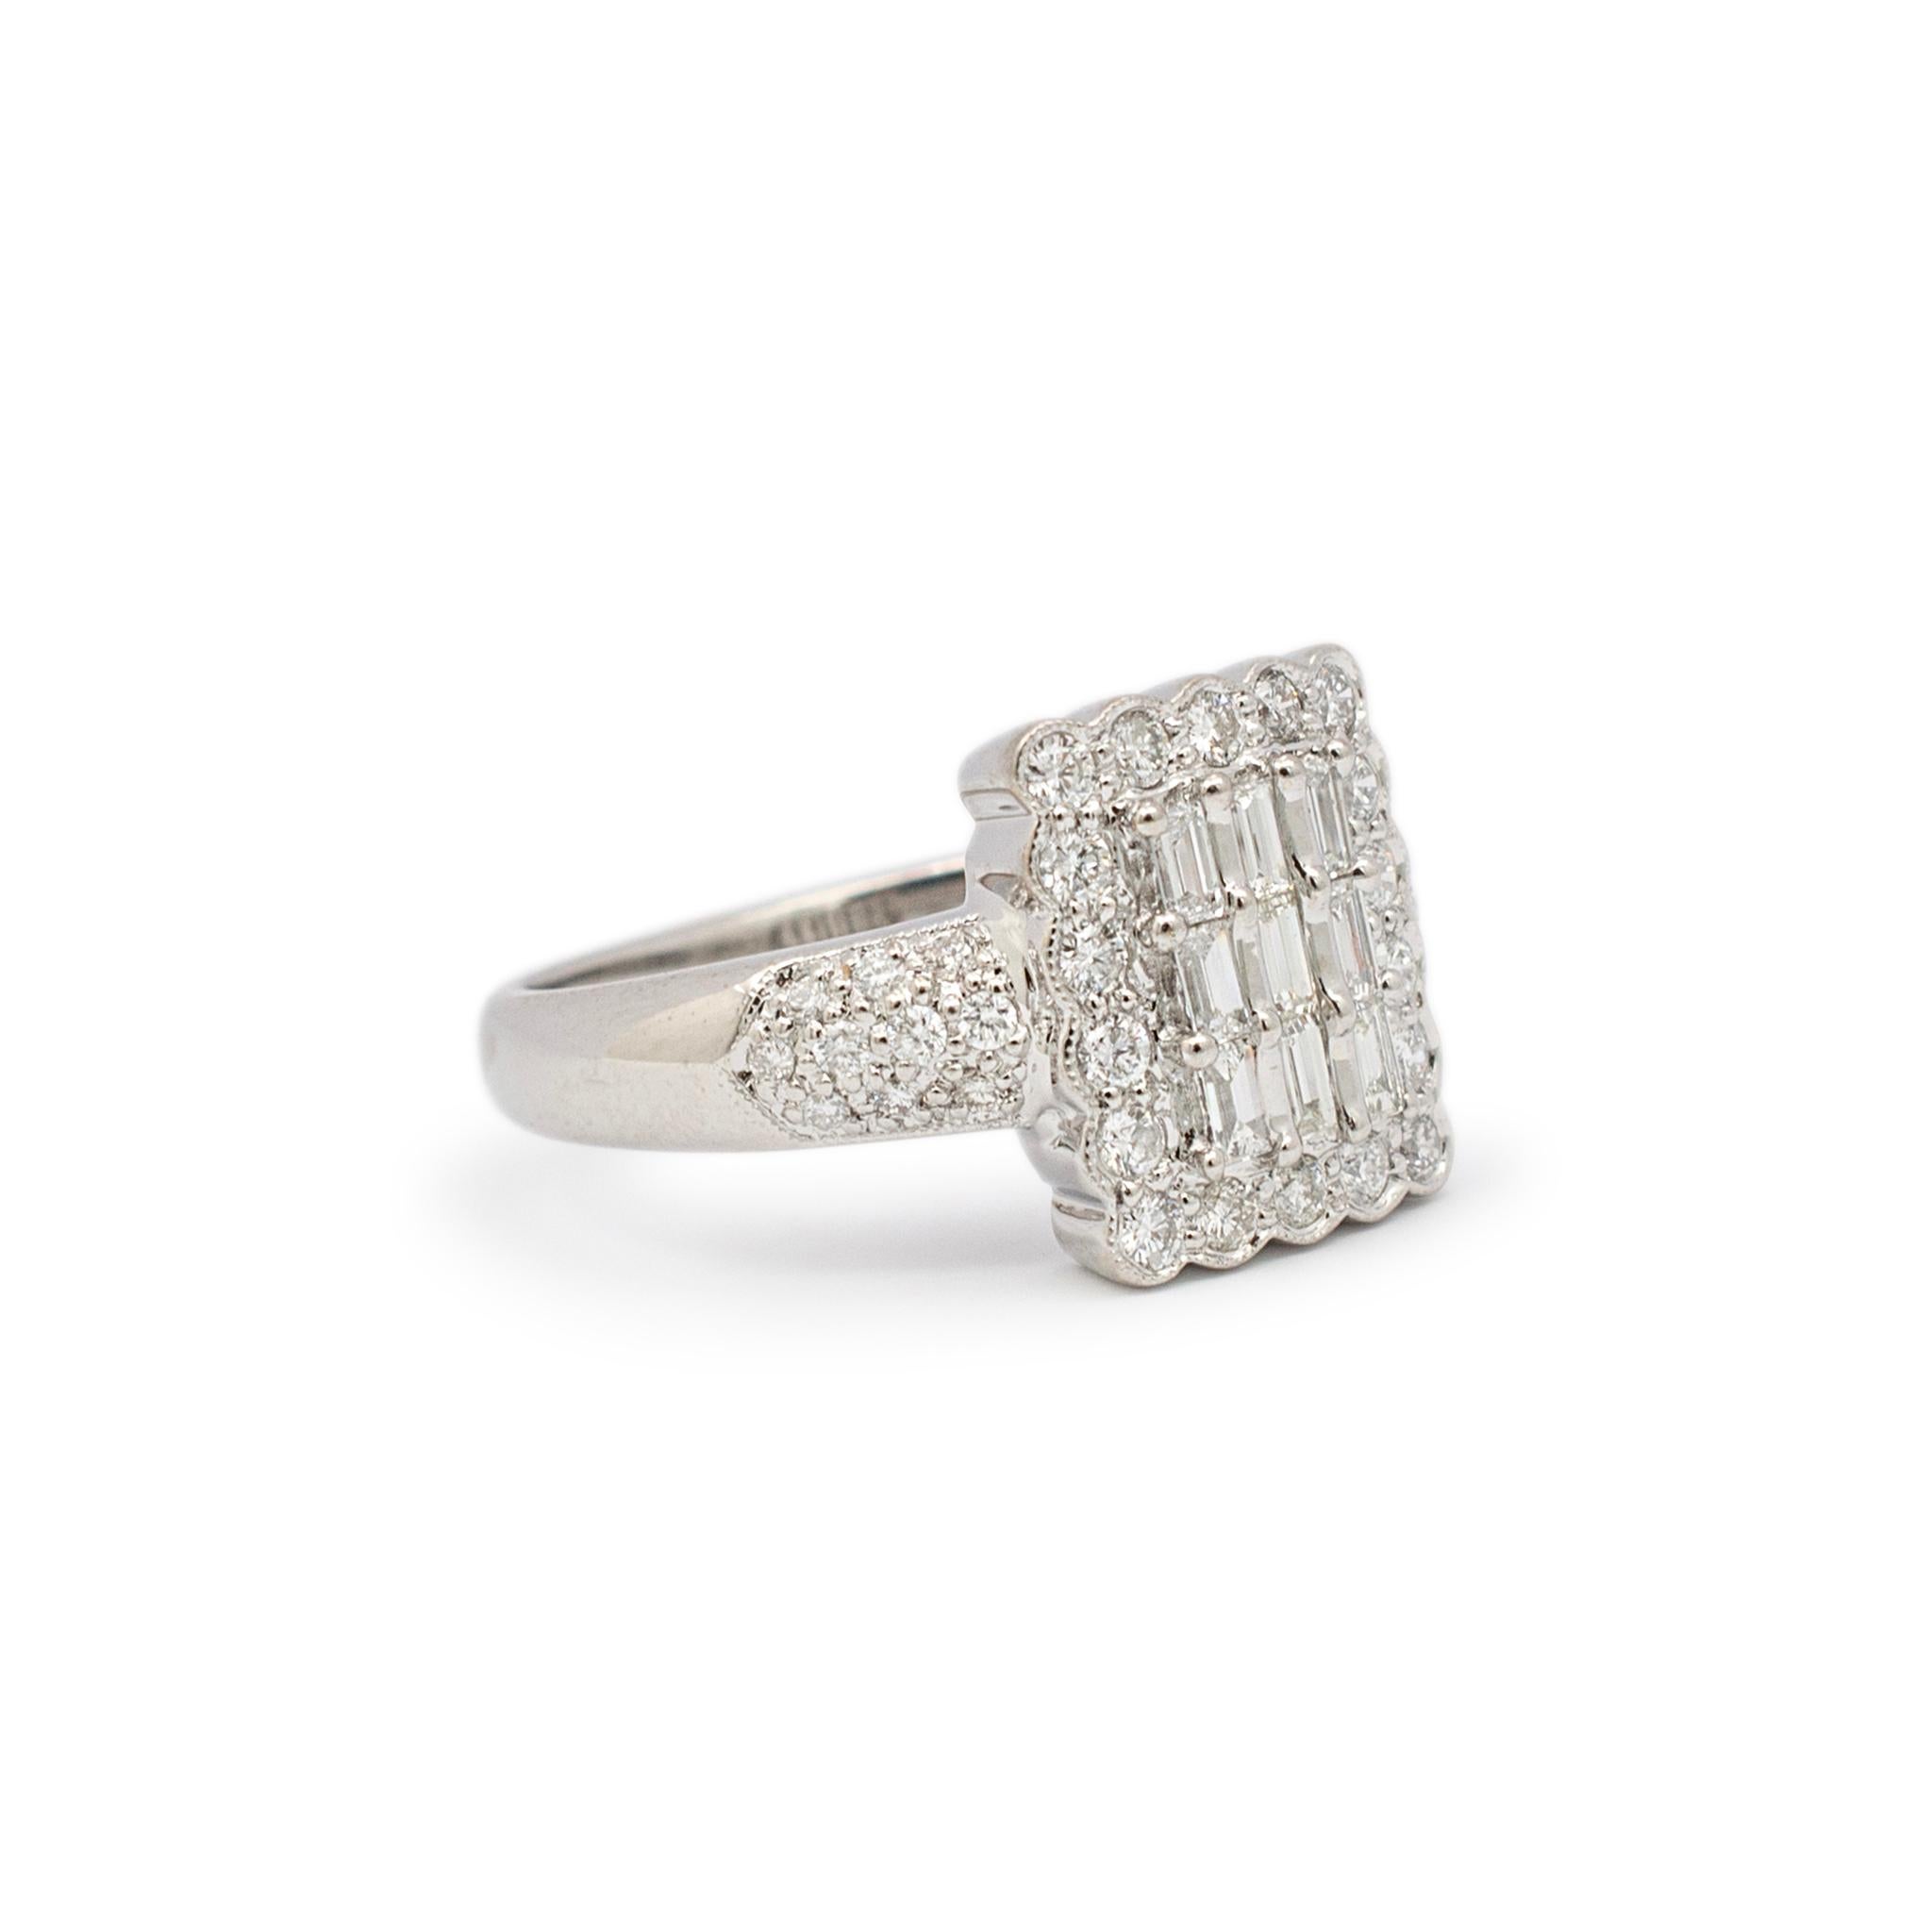 Ladies 18K White Gold Cluster Pave Diamond Cocktail Ring In Excellent Condition For Sale In Houston, TX